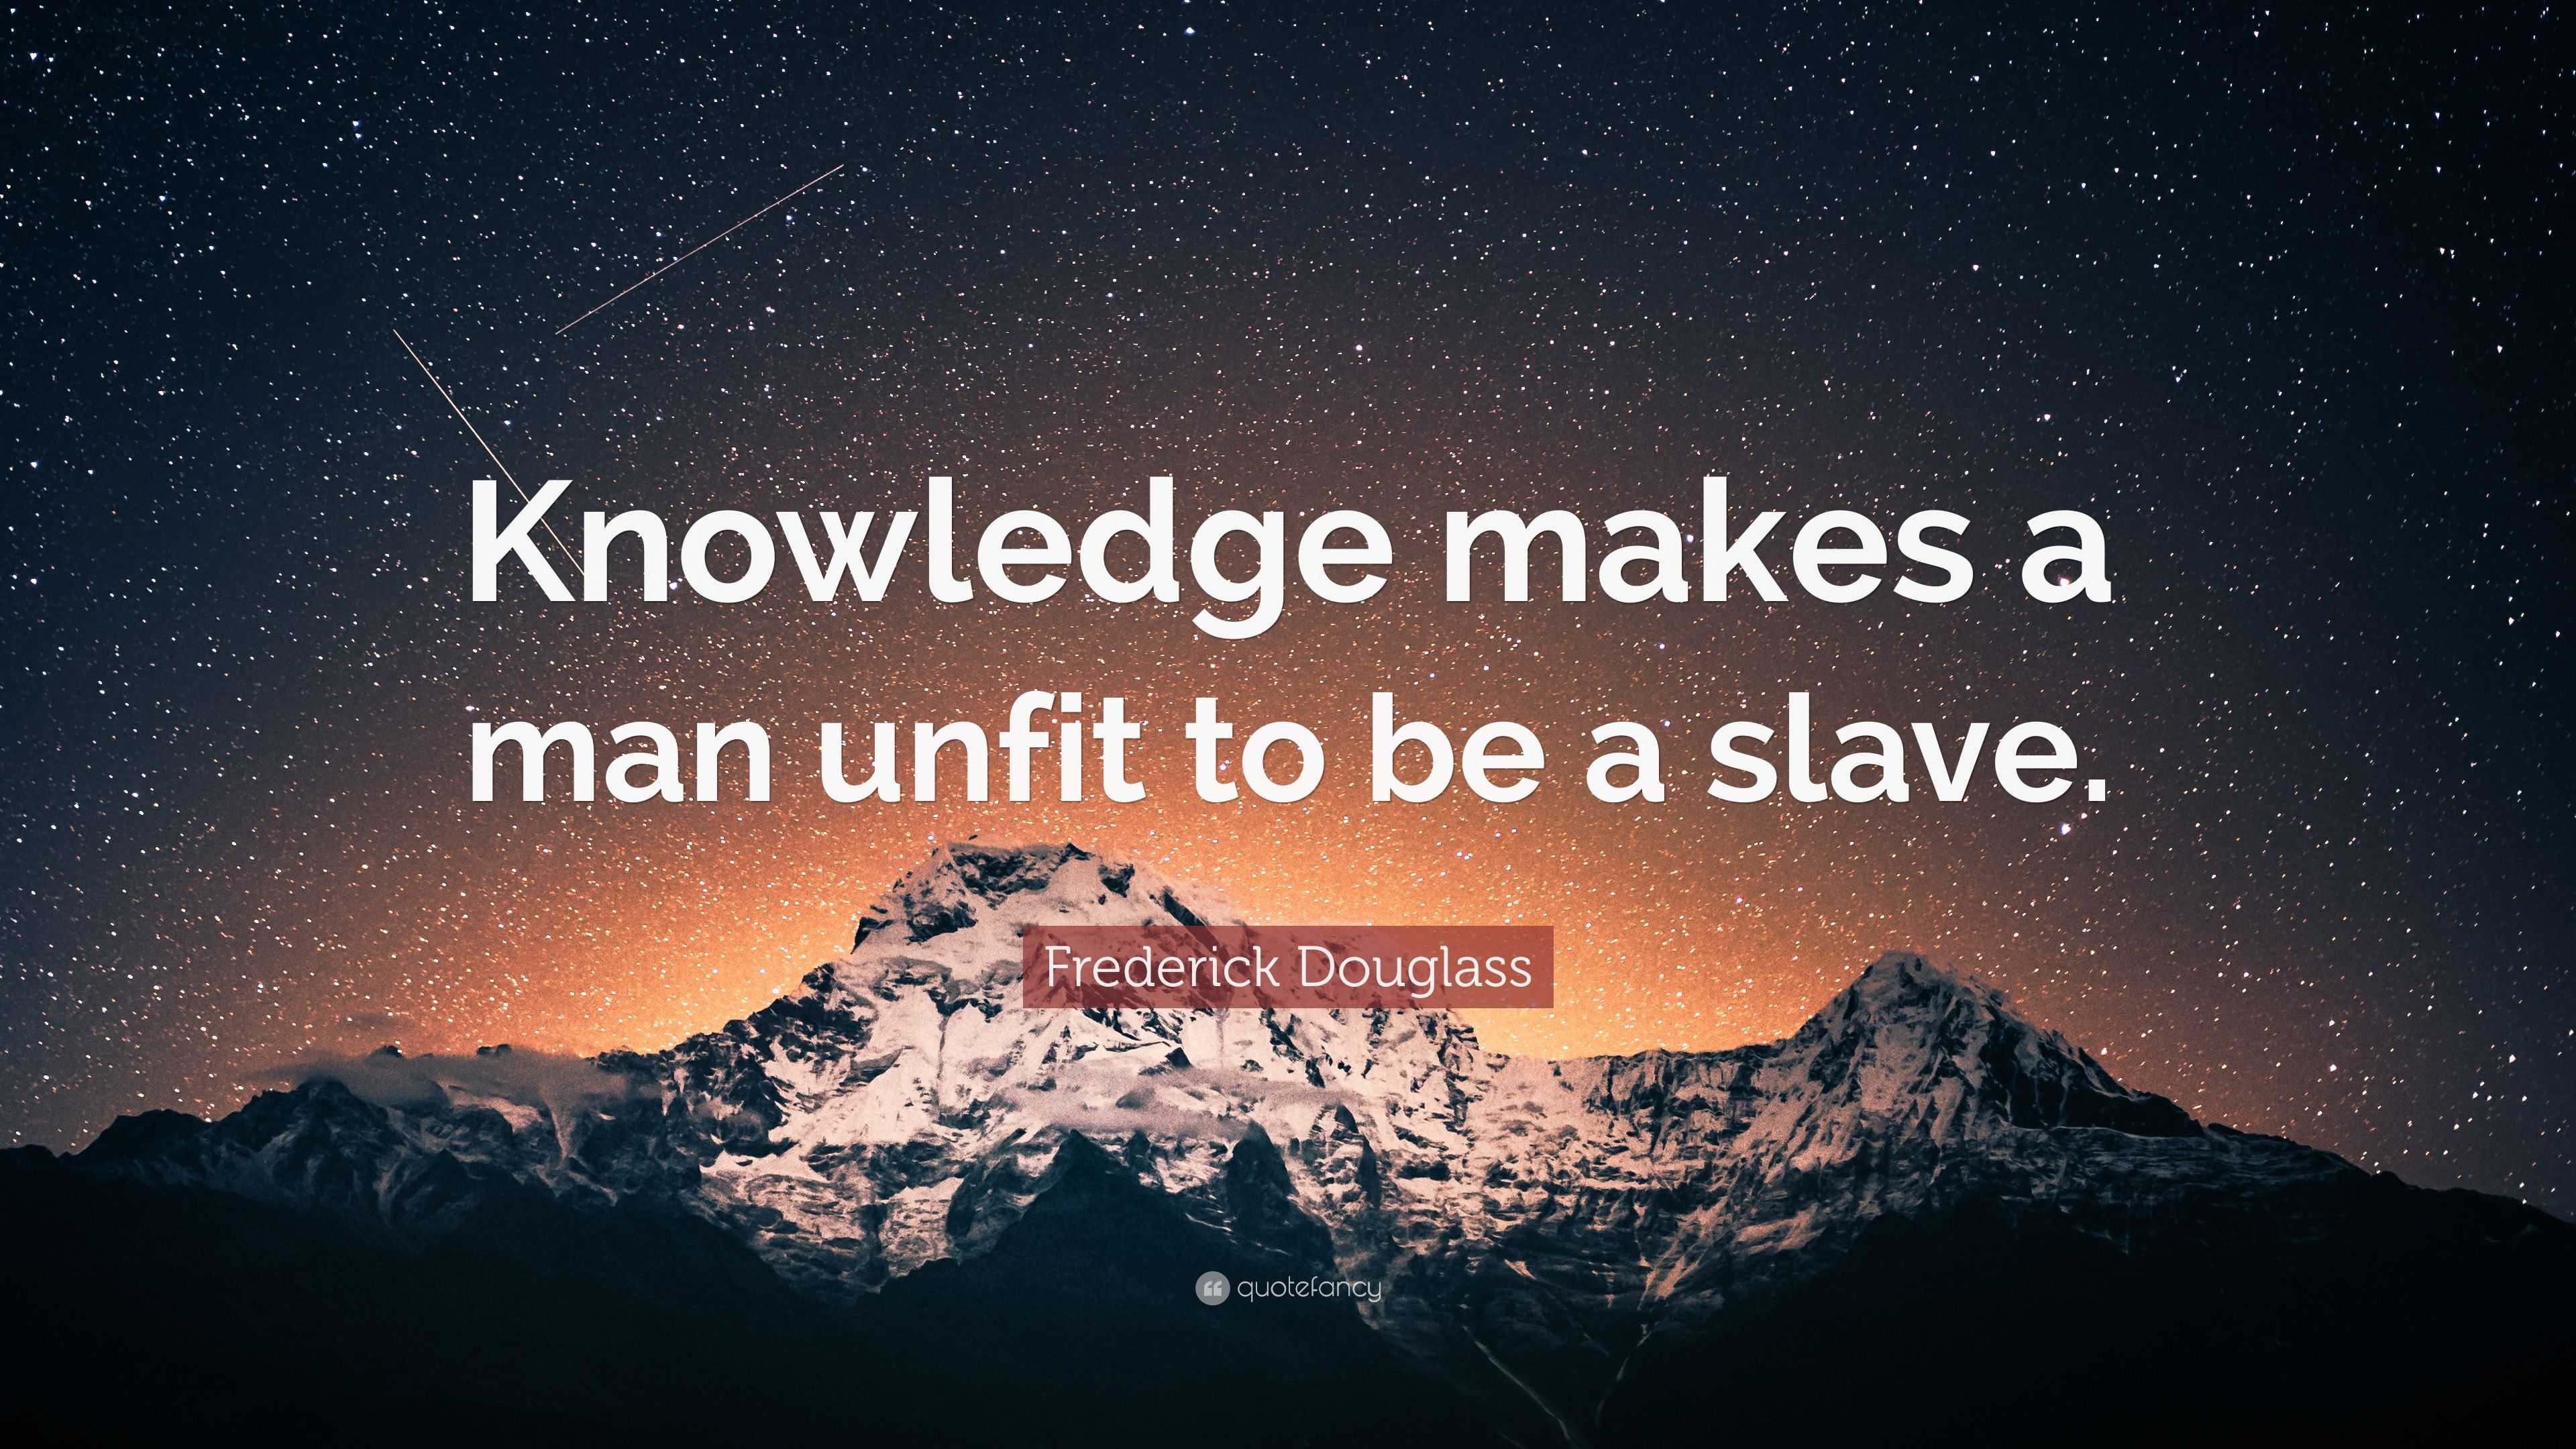 Frederick Douglass Quote: “Knowledge makes a man unfit to be a slave.”